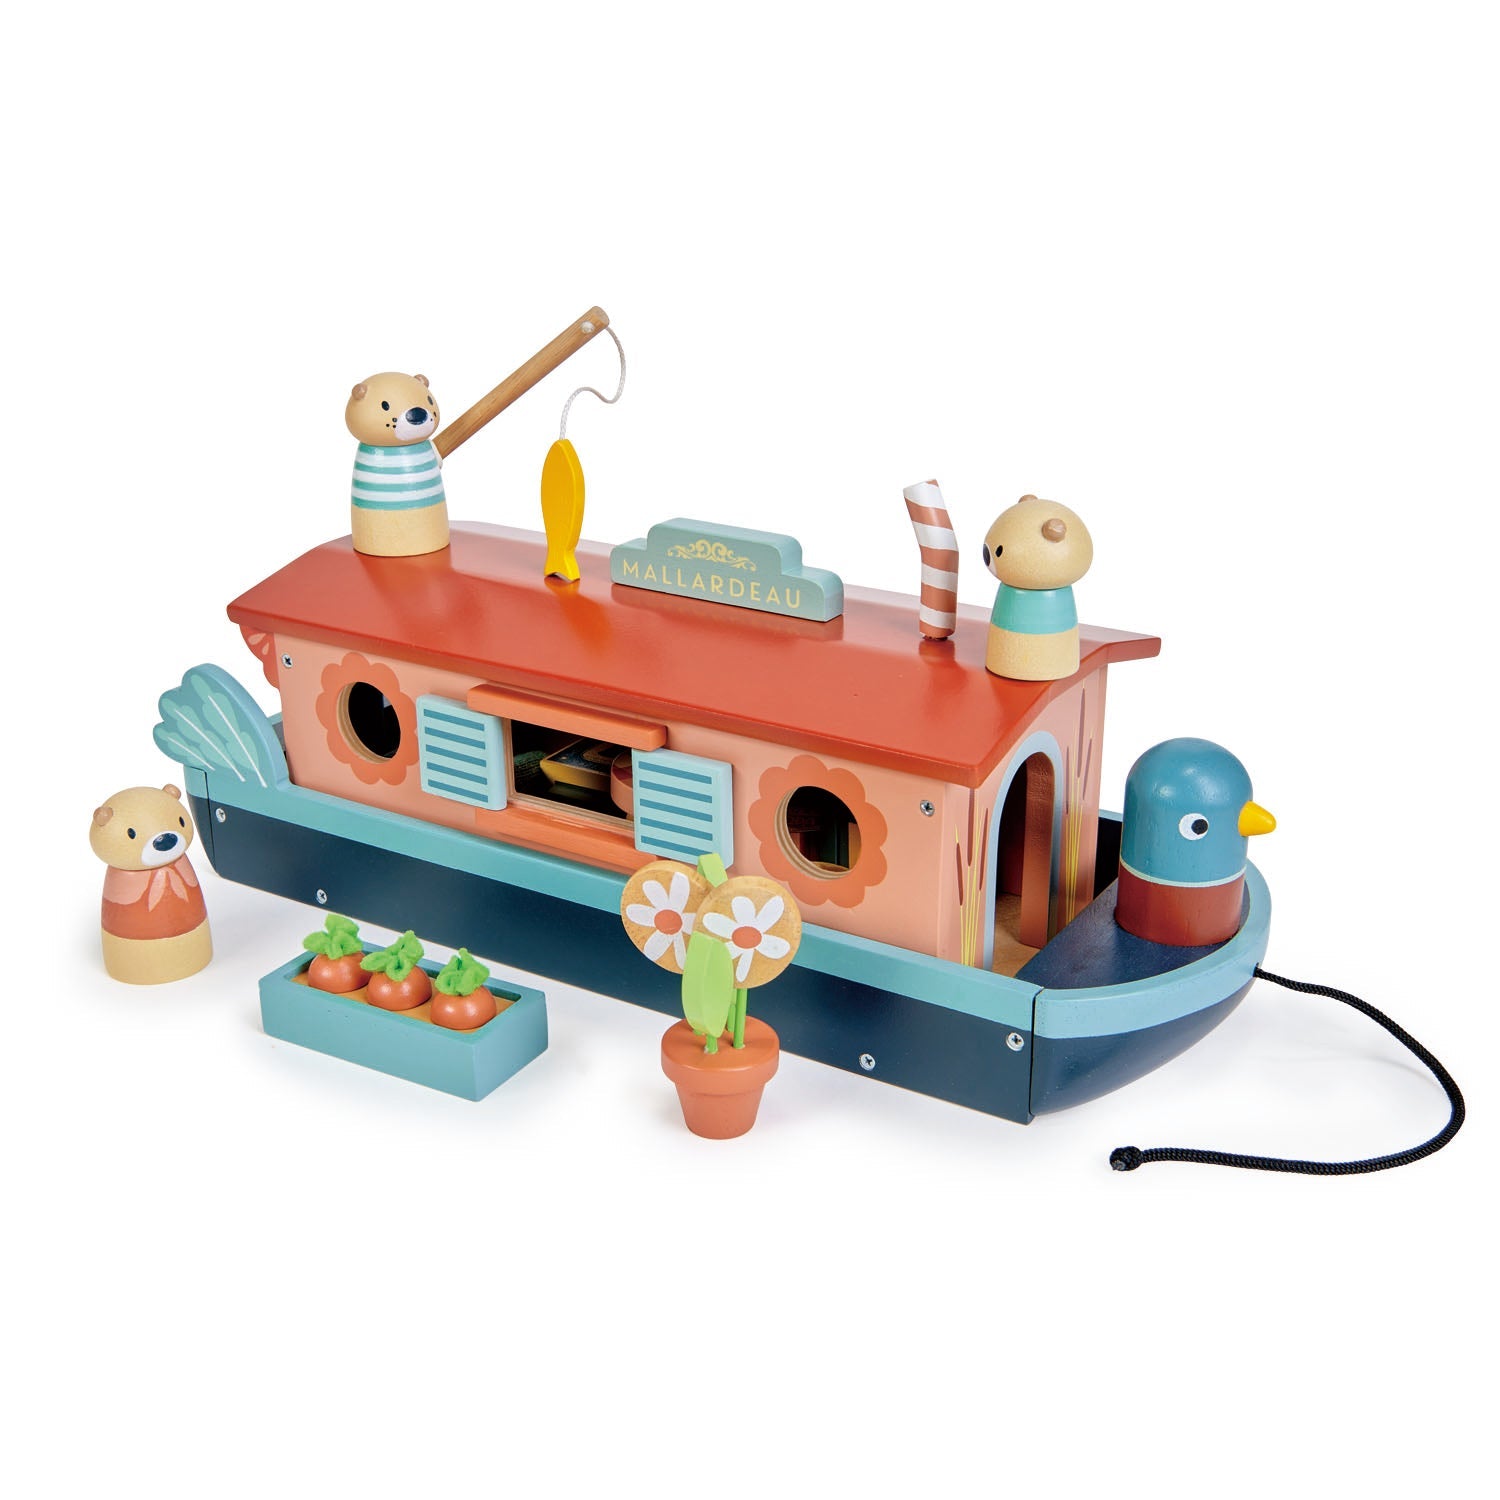 Tender Leaf Toys Little Otter Canal Boat - A charming wooden doll family residing in the 'Malardeau' canal boat. Promotes language development, emotional awareness, and storytelling in children